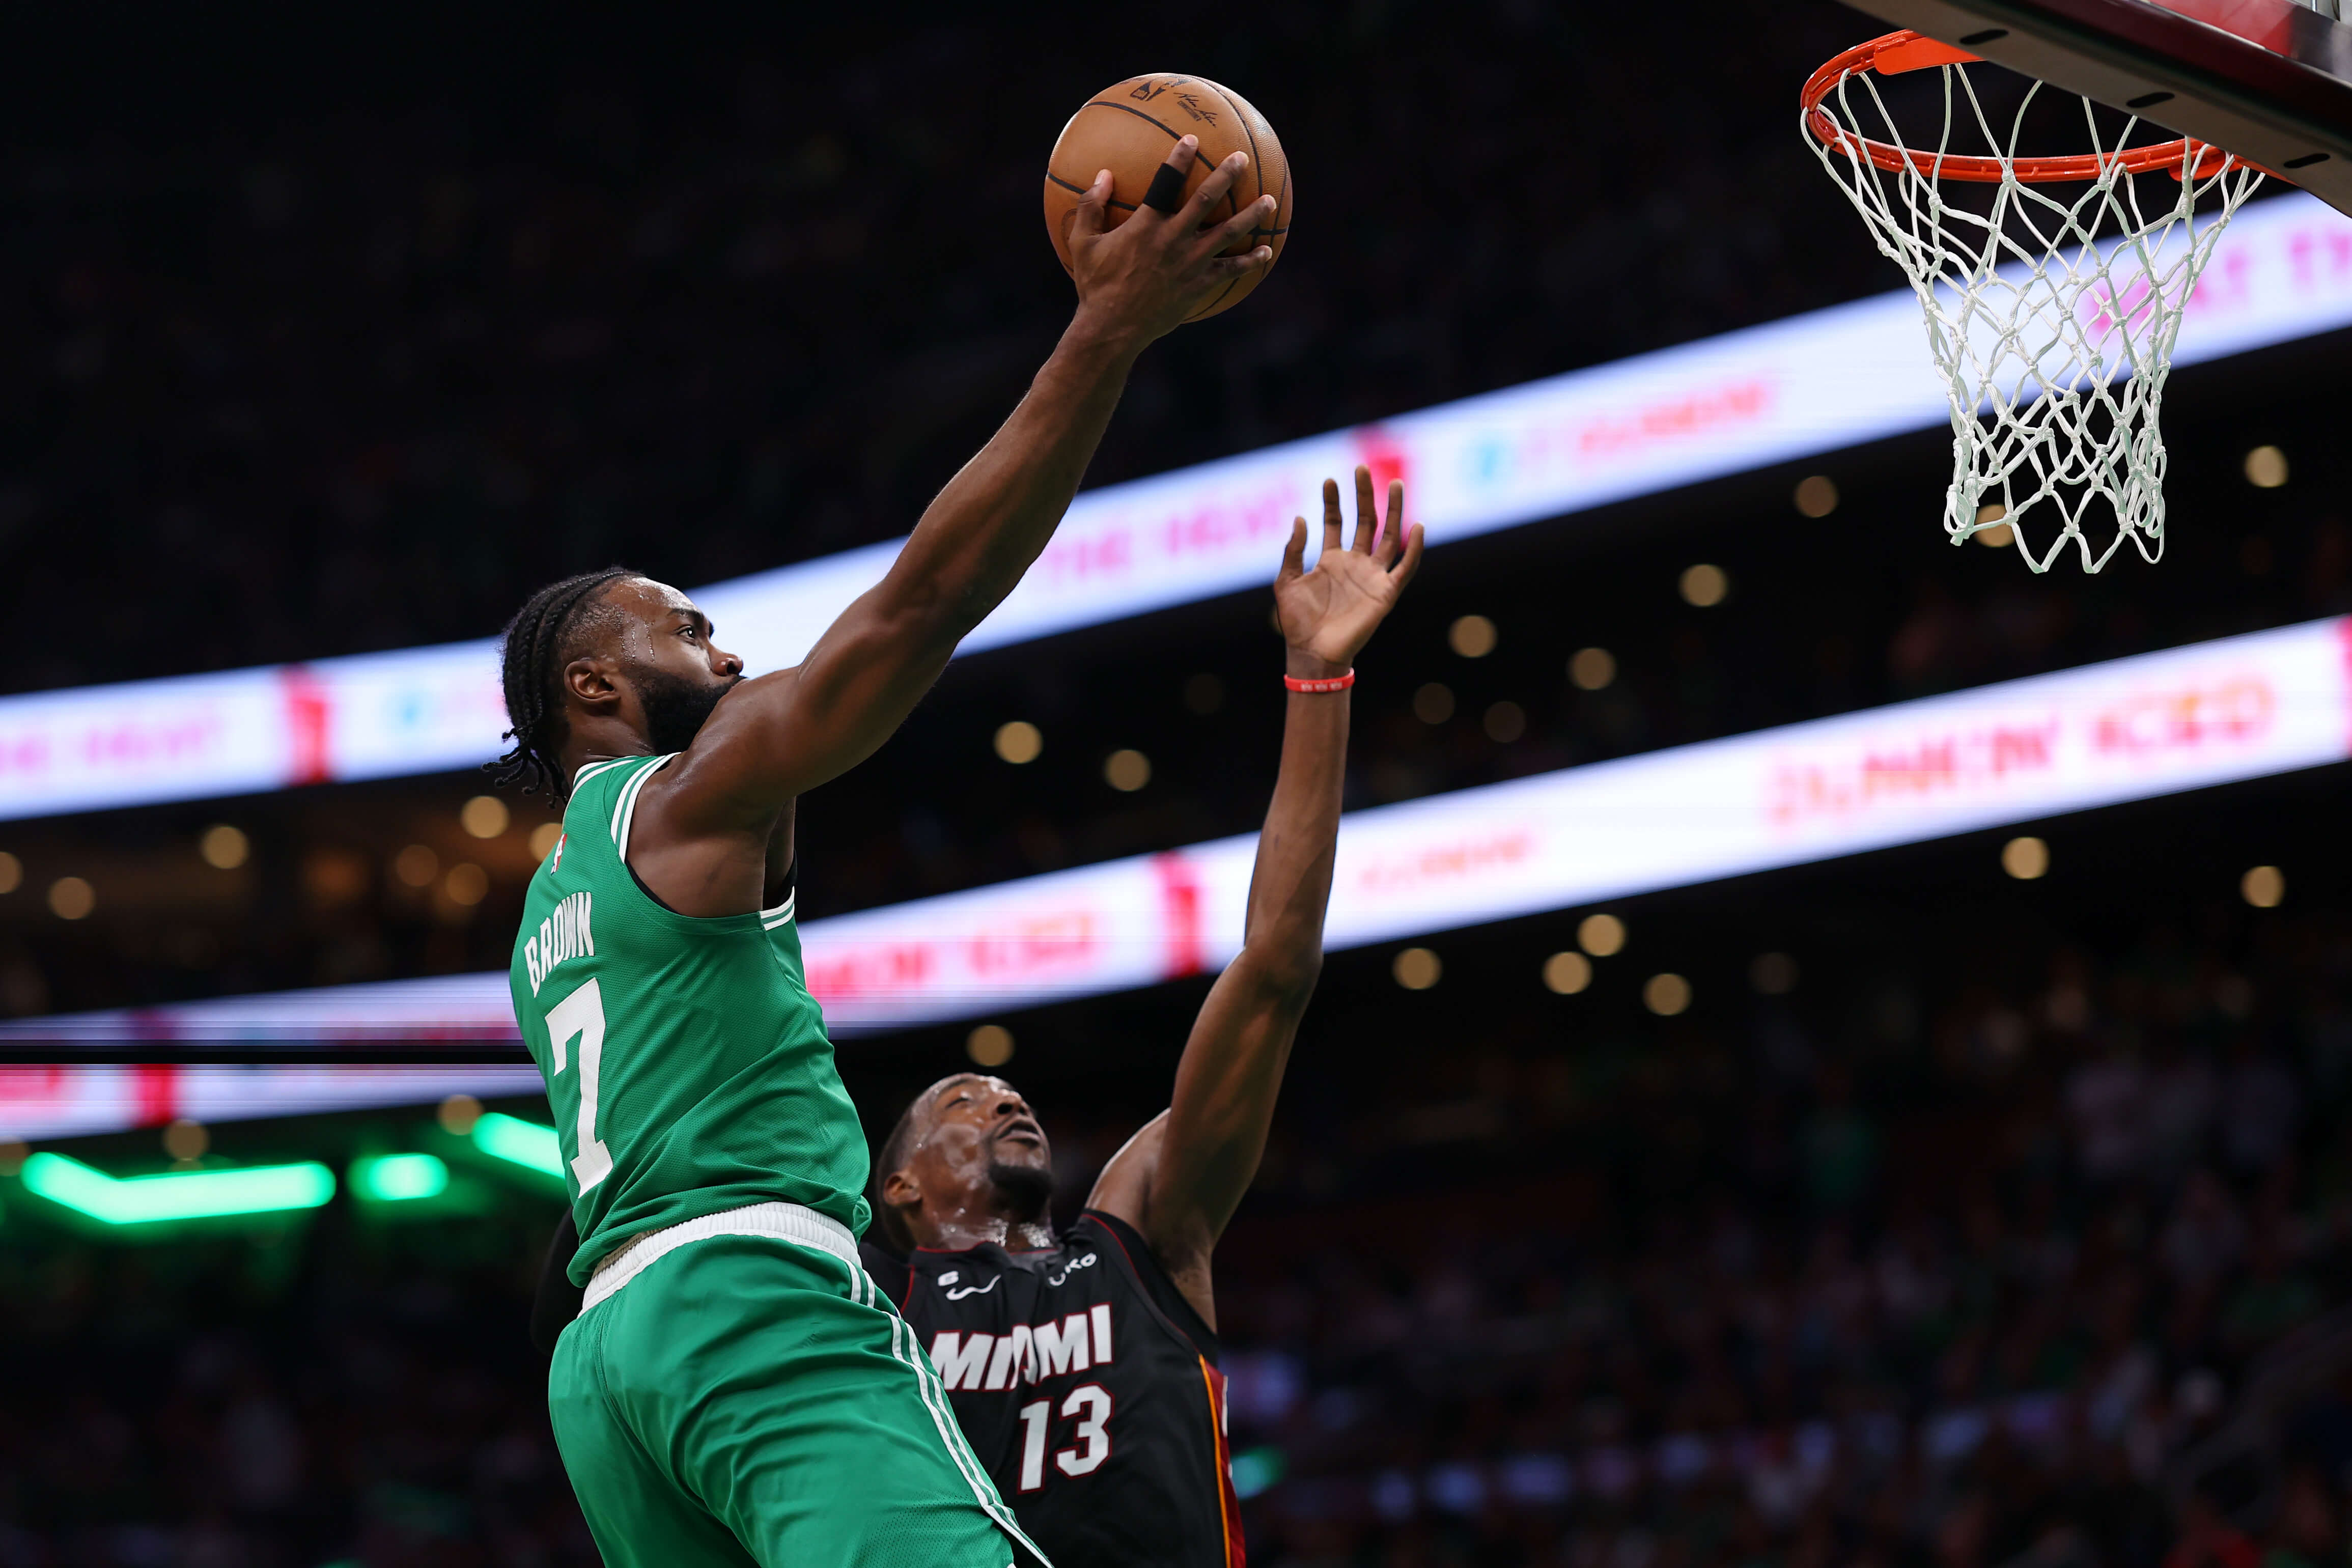 Jaylen Brown of the Boston Celtics drives to the basket against Bam Adebayo of the Miami Heat.